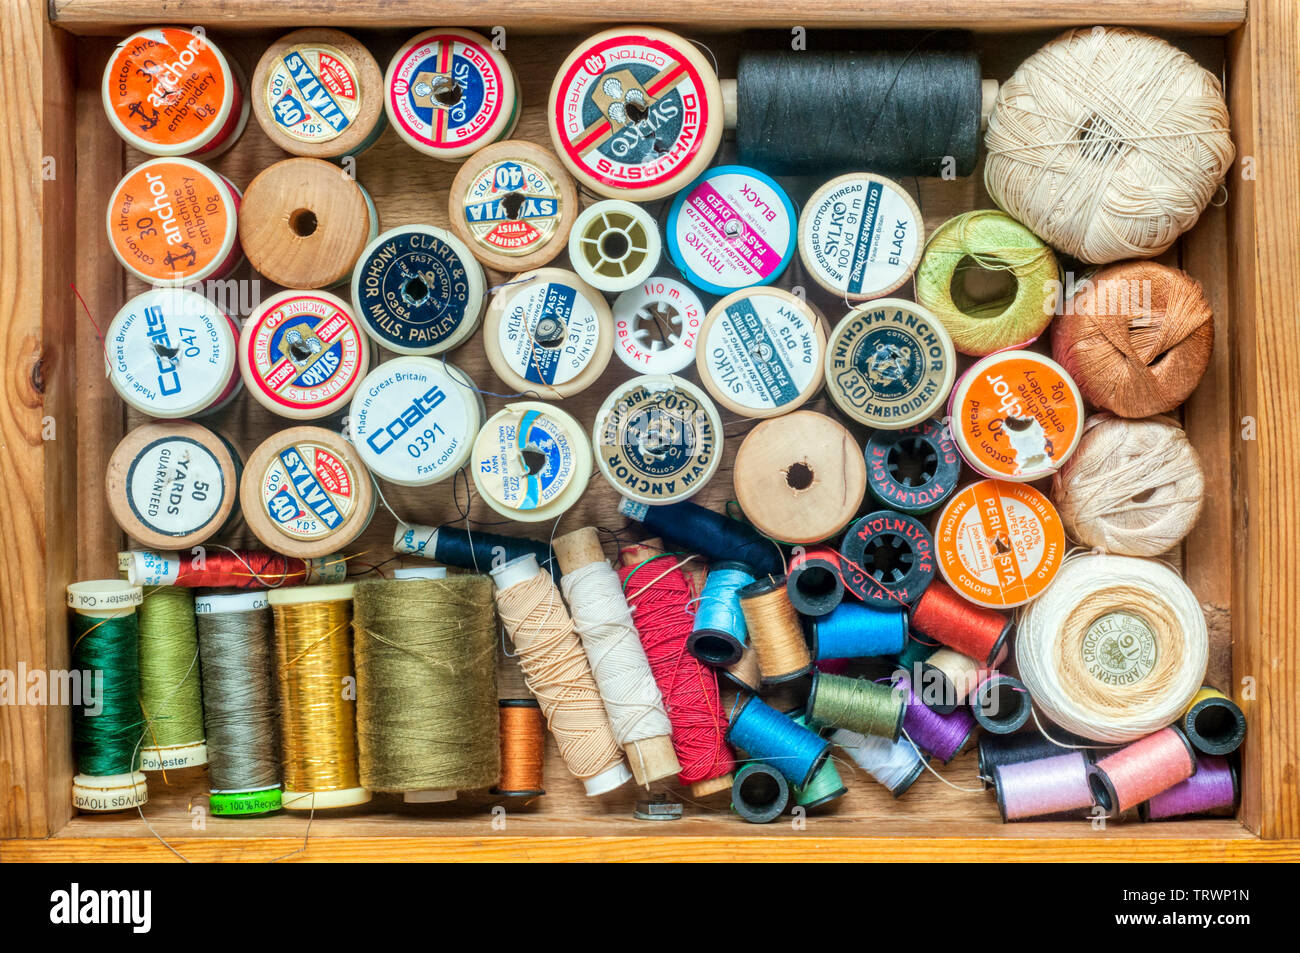 Haberdashery or sewing items stored in a drawer - reels of cotton and thread. Stock Photo